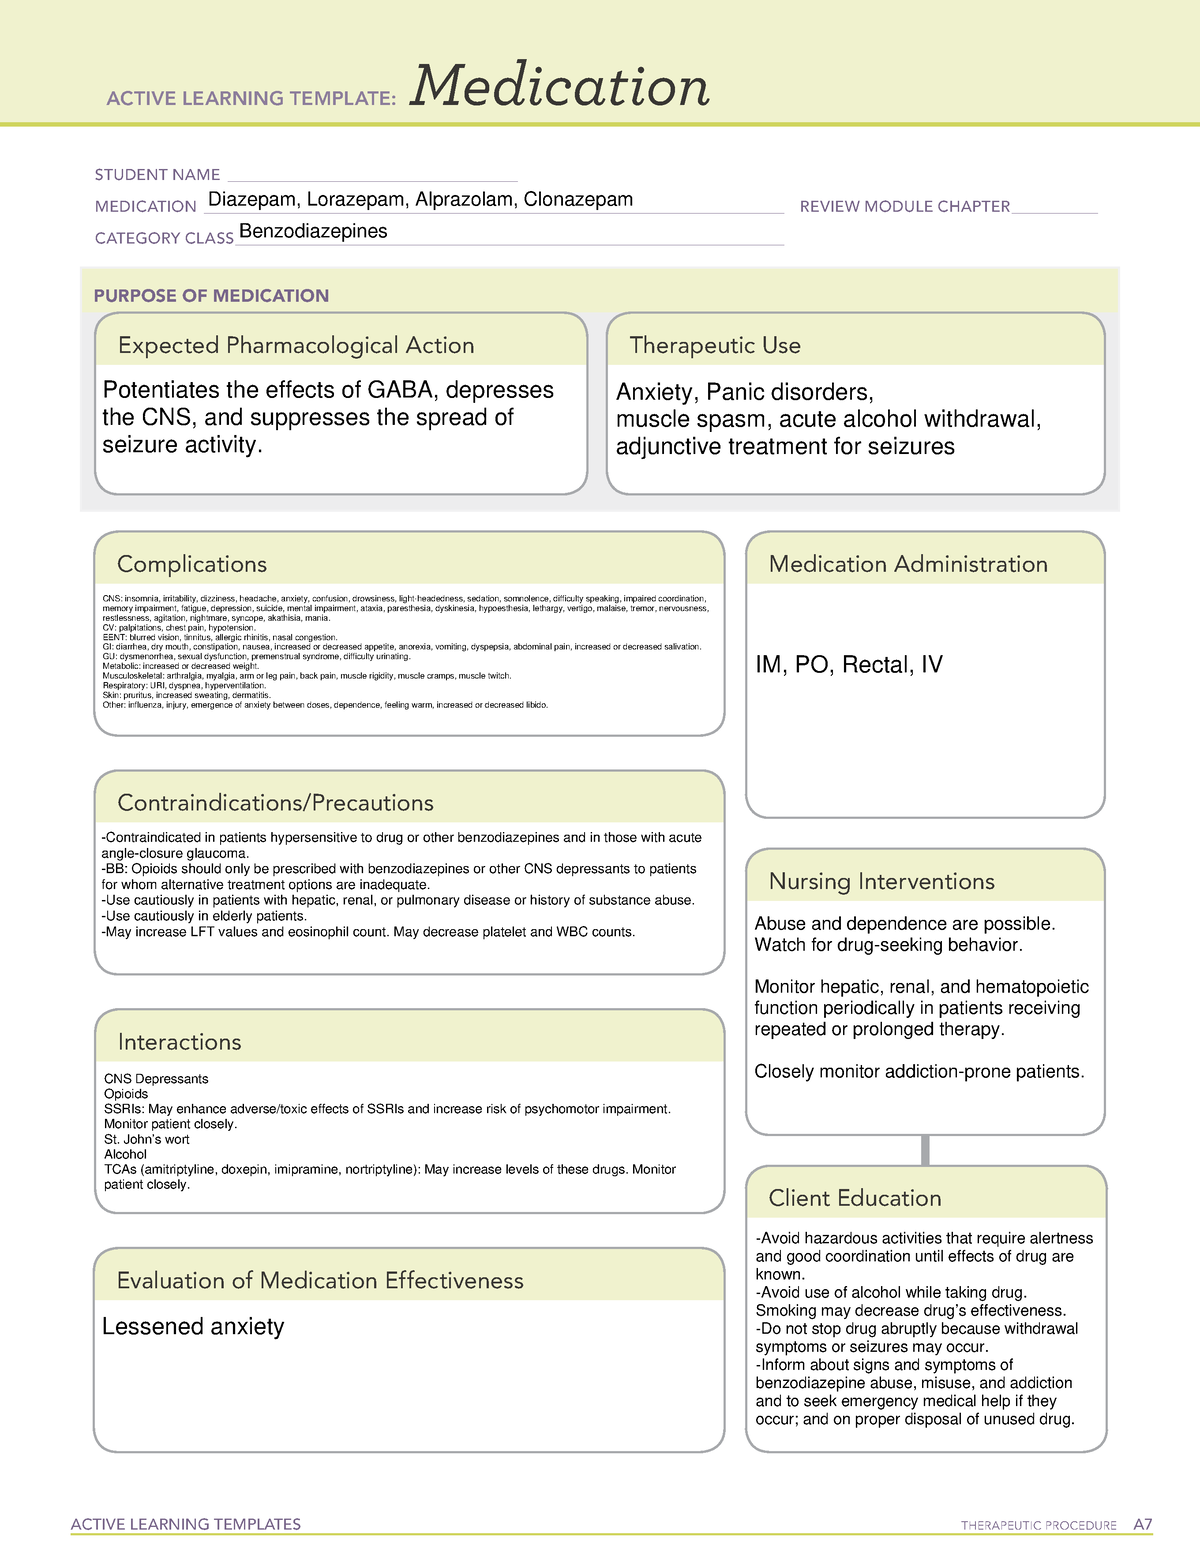 ATI Med template Benzodiazepines ACTIVE LEARNING TEMPLATES 